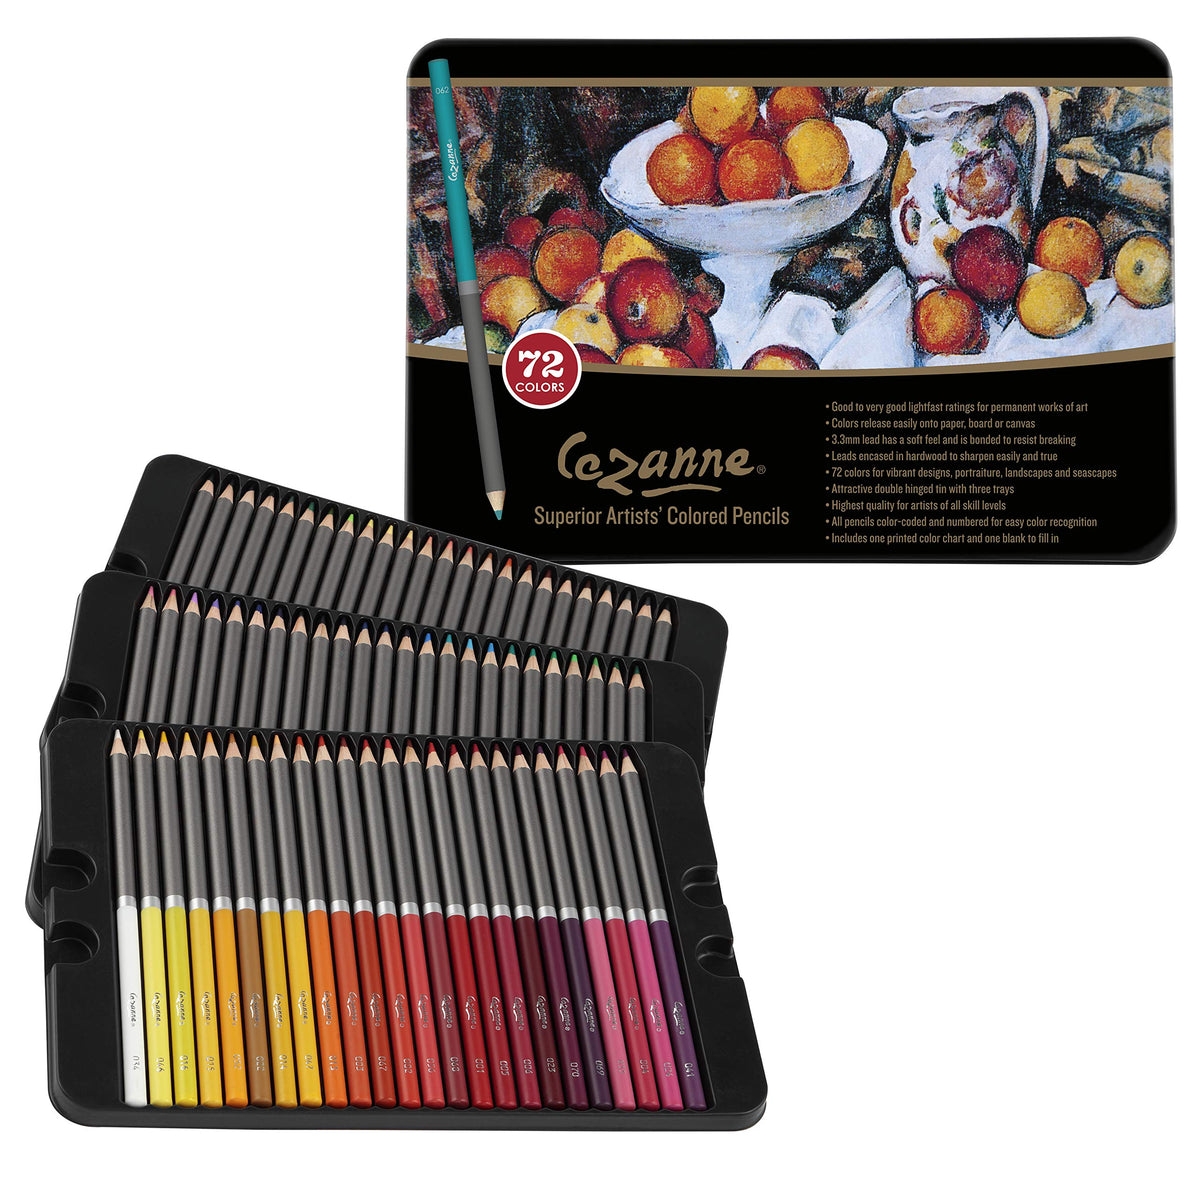 160 Professional Colored Pencils, Artist Pencils Set for Coloring Books,  Premium Artist Soft Series Lead with